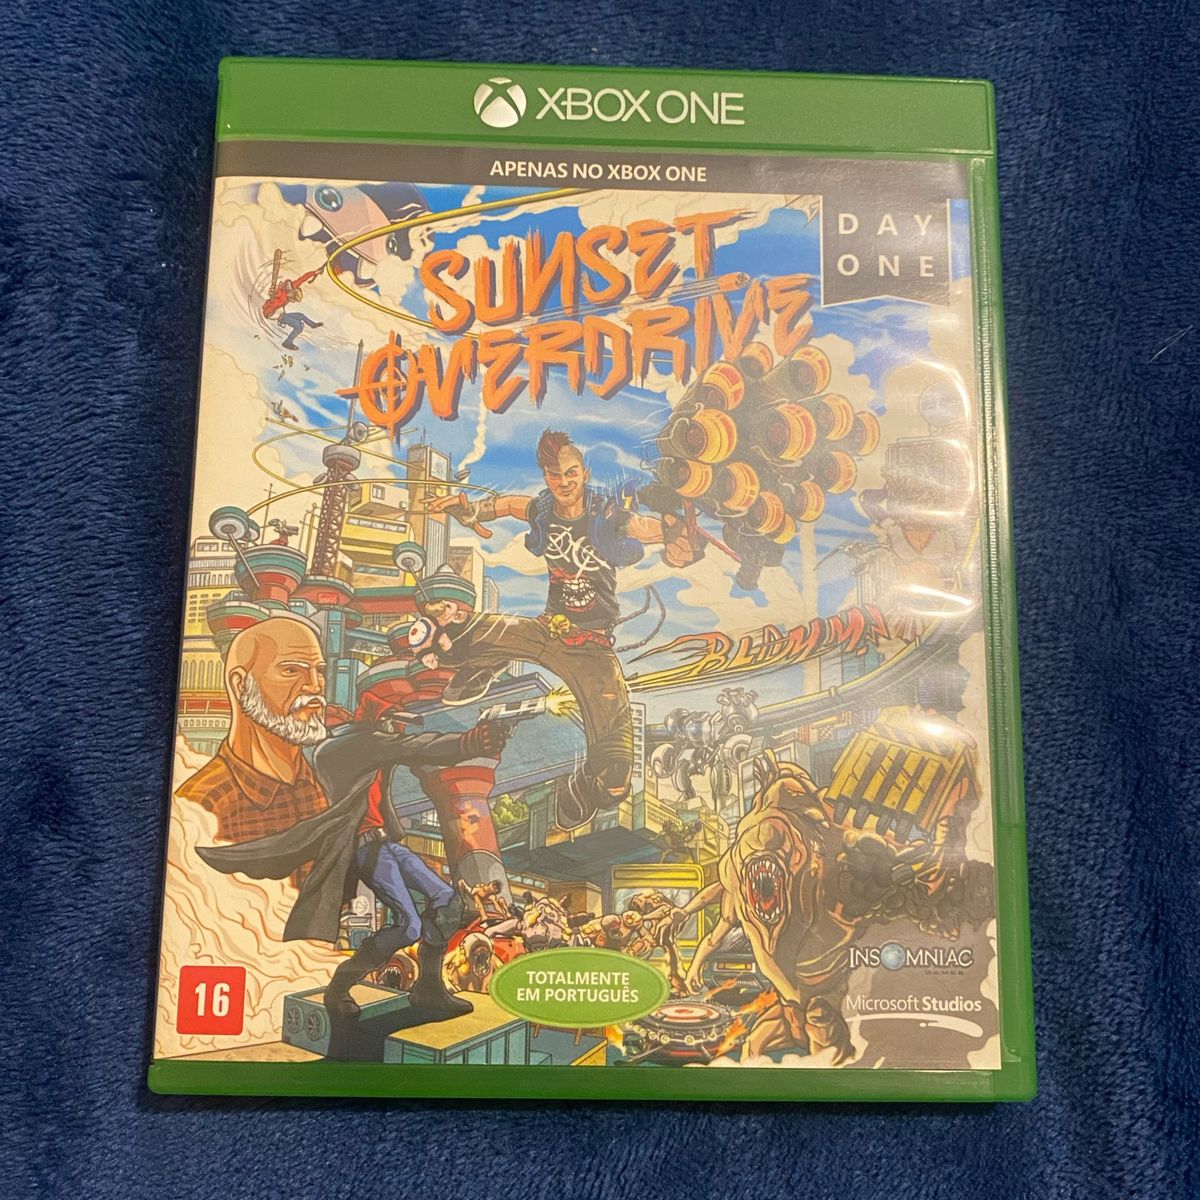 Sunset Overdrive for Xbox One